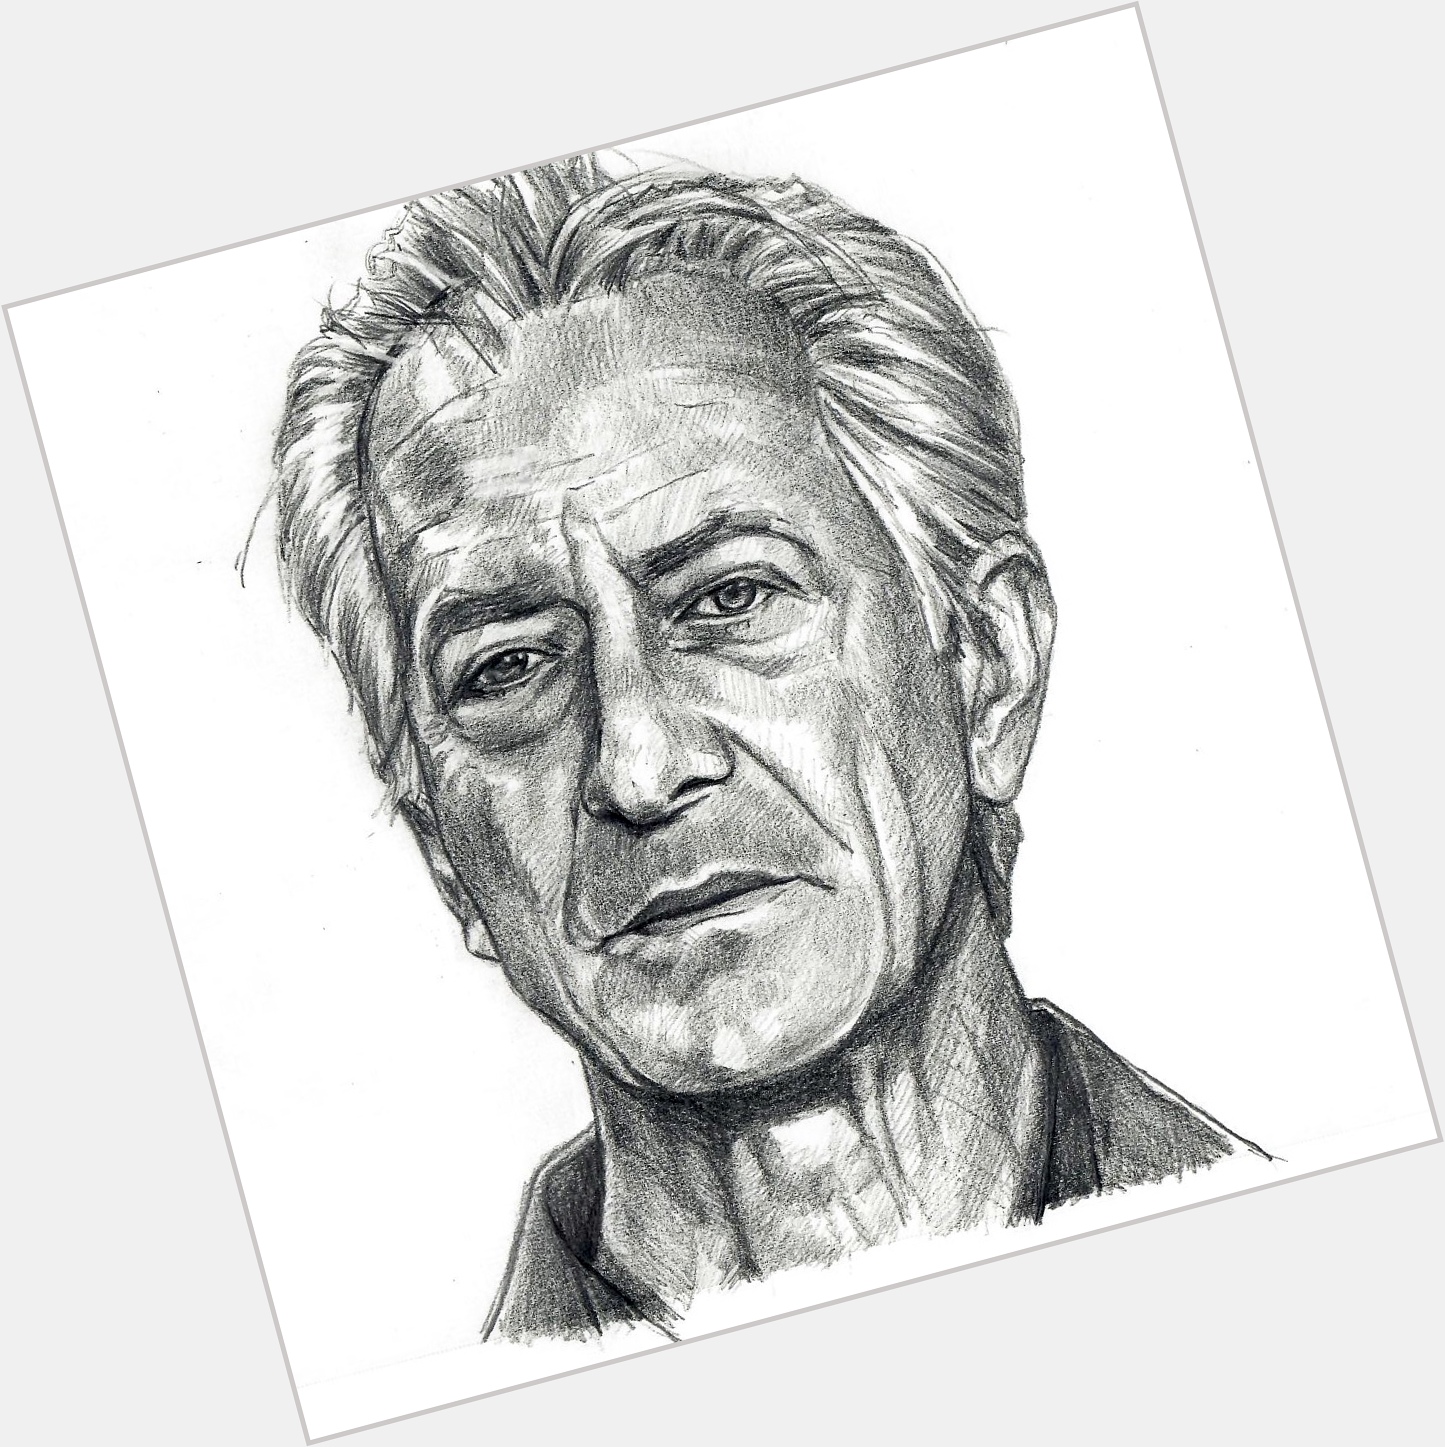 Happy 72nd Birthday to the amazing actor David Strathairn. An inspirational human being. 